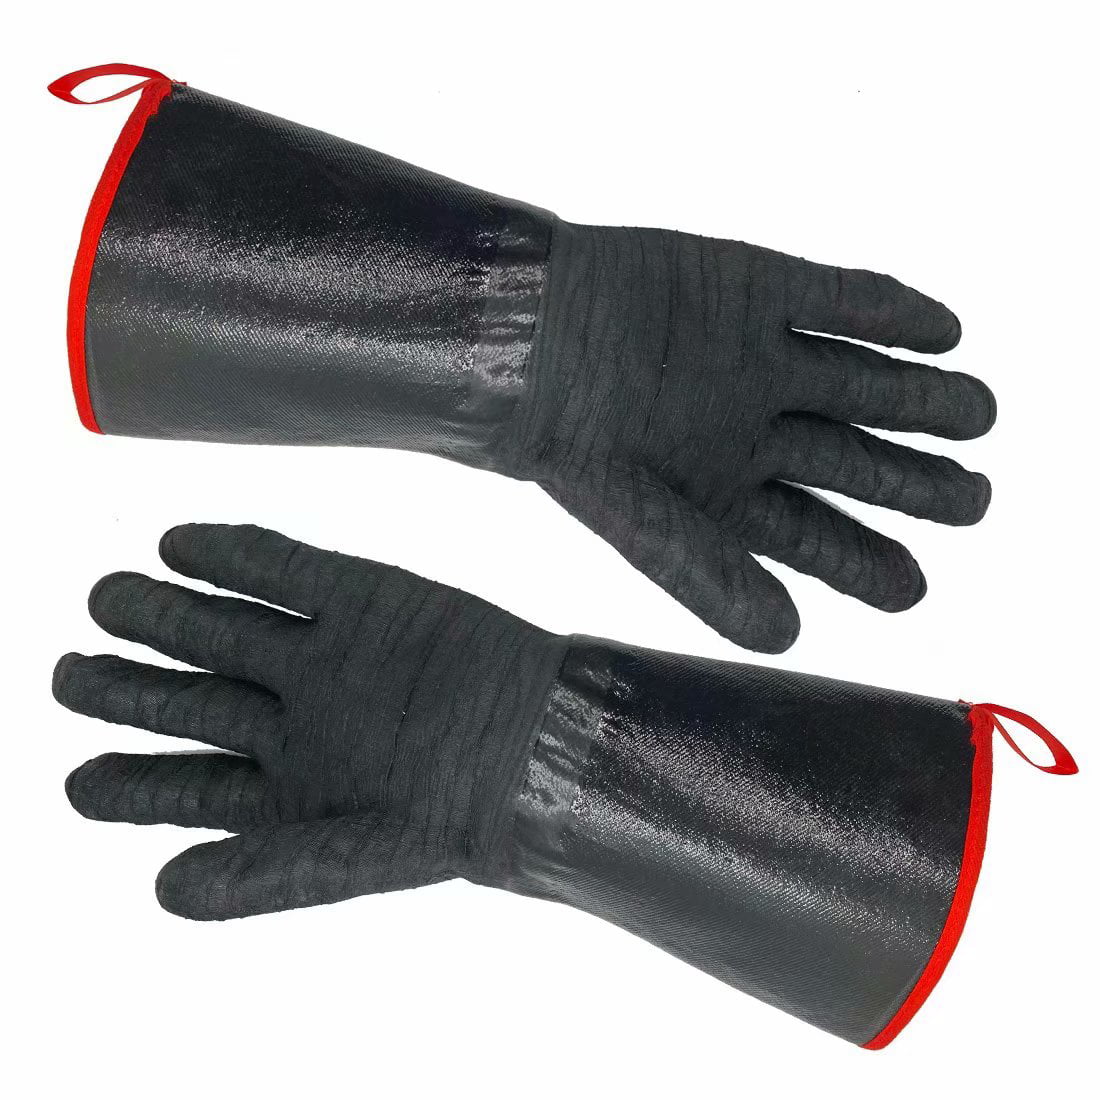 Heat Resistant BBQ Gloves 932°F Oven Barbecue Grilling Baking Welding Mitts 